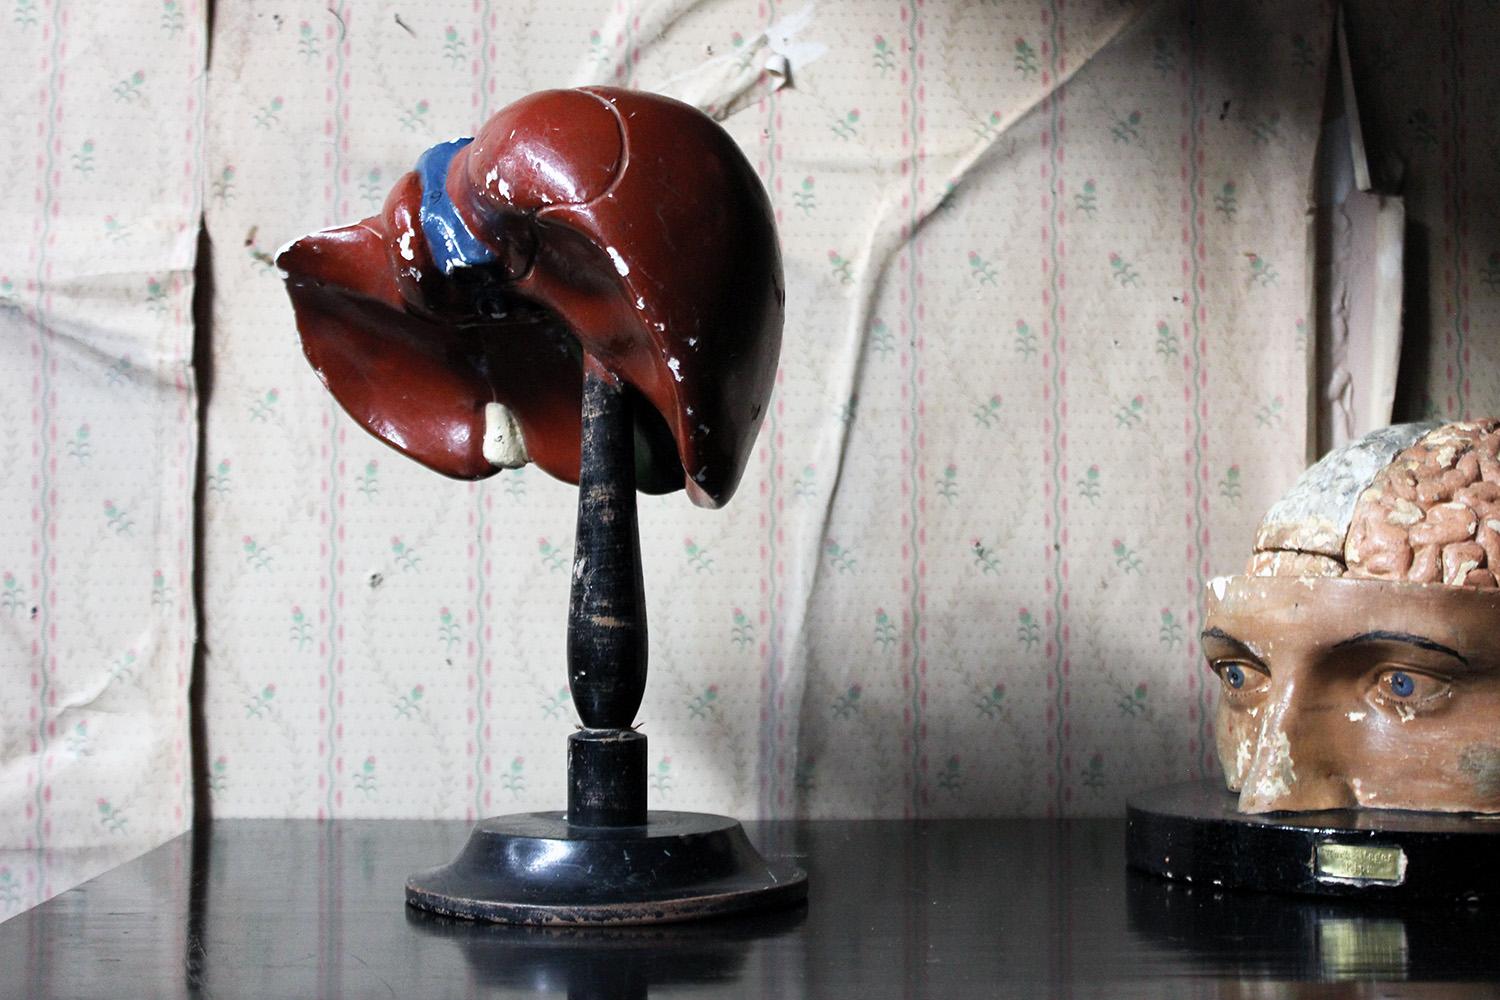 The cast and moulded polychrome painted didactic model of the human liver on a turned ebonized stand, the model being plaster and hand painted with detailed numbered regions of the liver, made by either Bock Steger or Marcus Sommer in late 19th